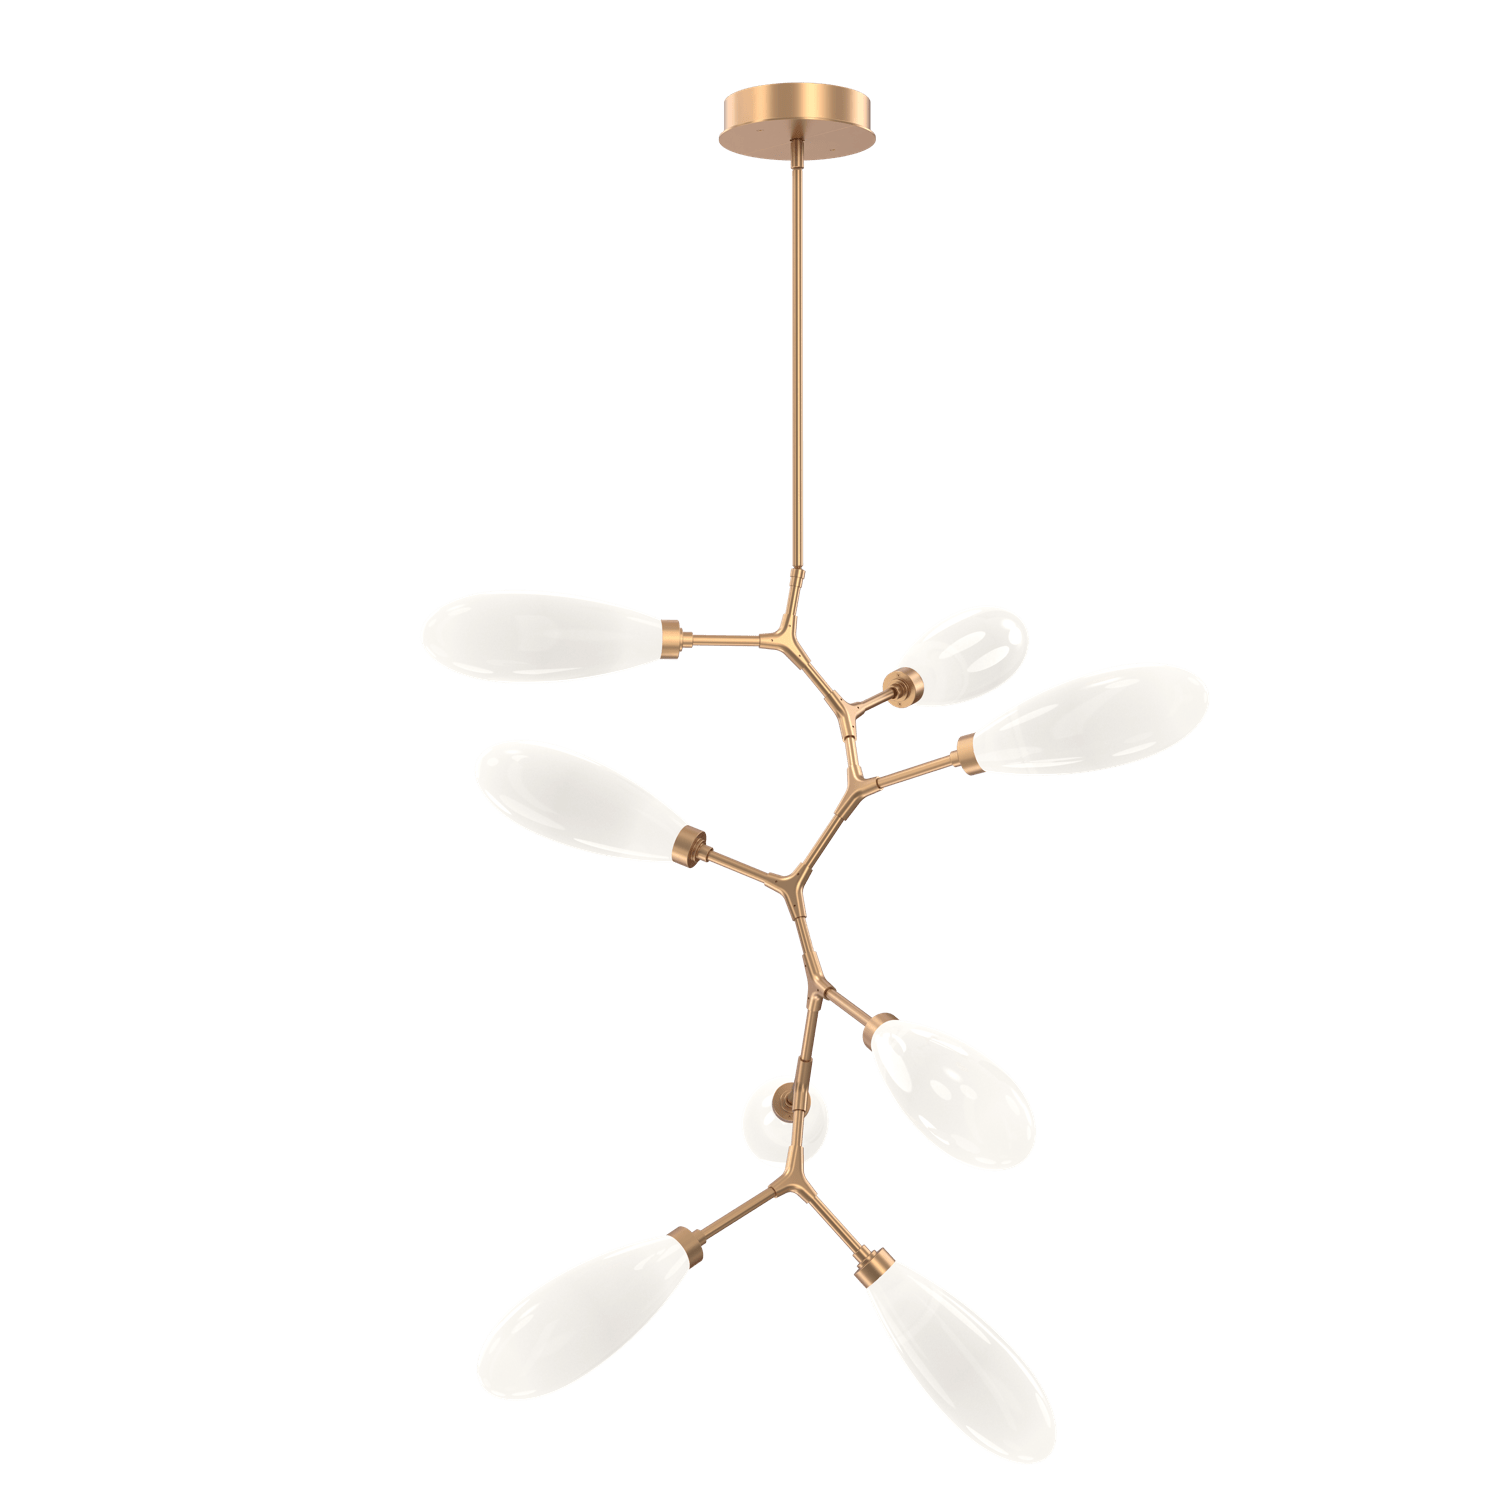 CHB0071-VB-NB-WL-LL-Hammerton-Studio-Fiori-8-light-organic-vine-chandelier-with-novel-brass-finish-and-opal-white-glass-shades-and-LED-lamping